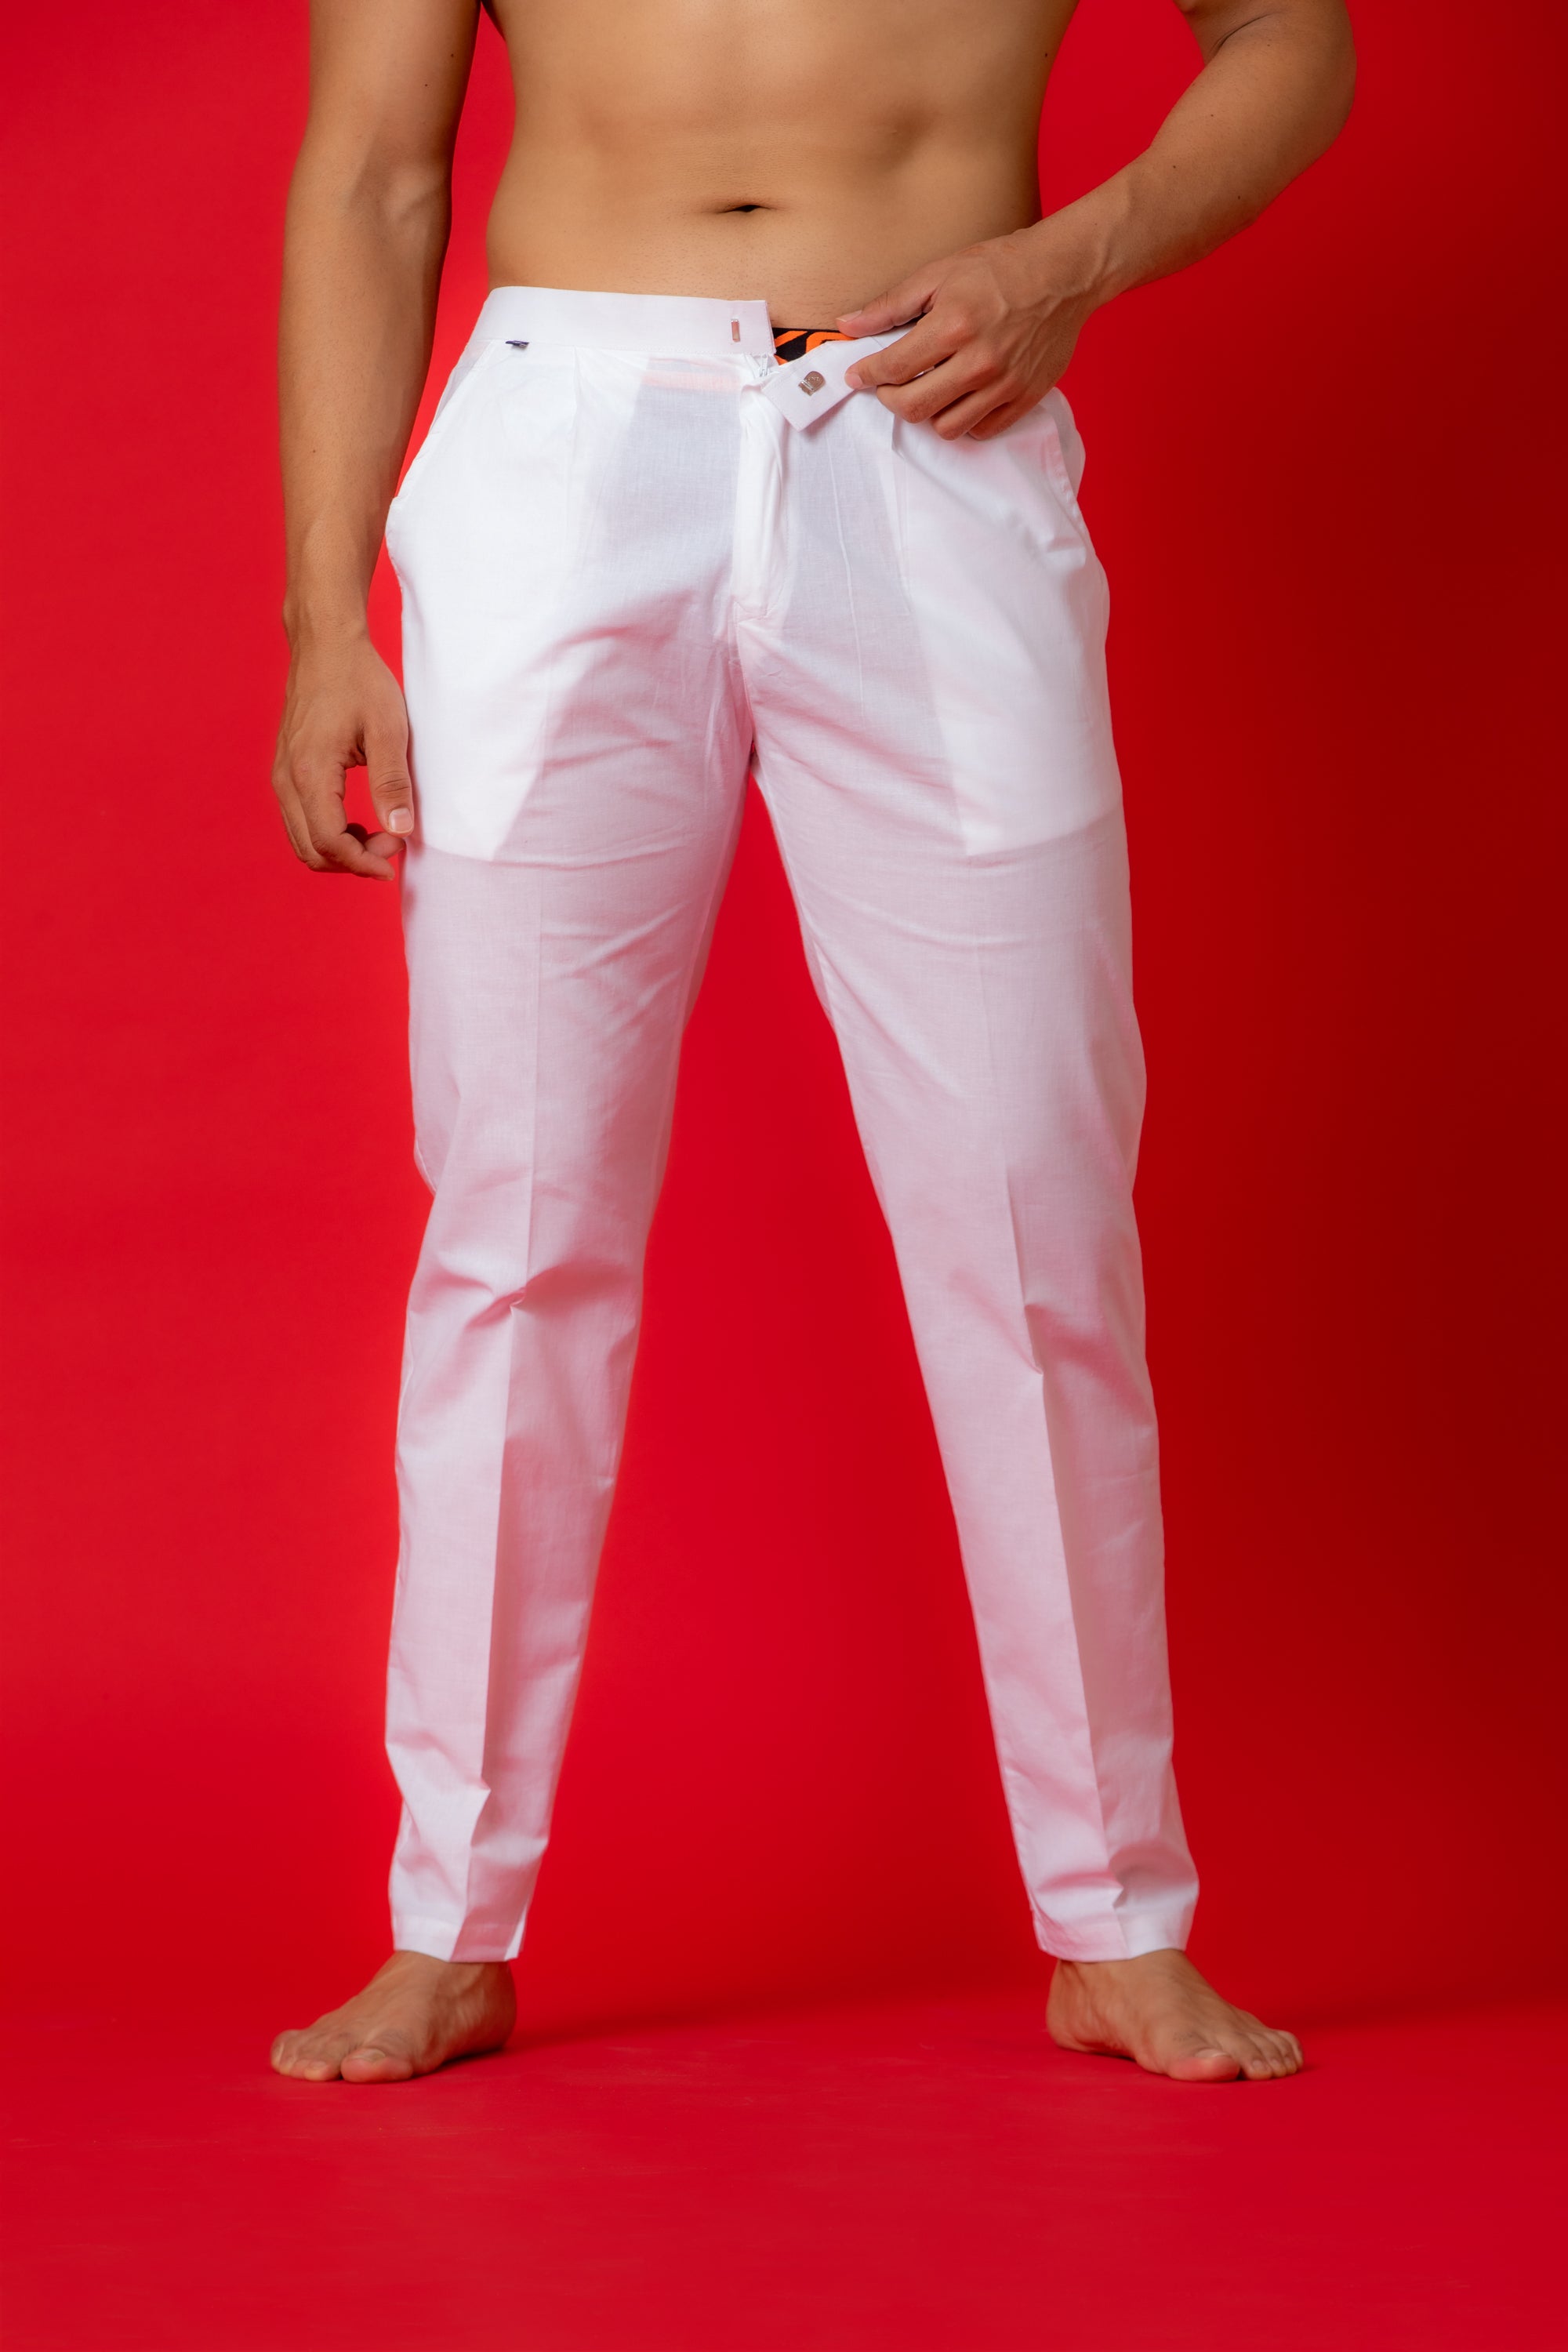 What goes well with white dress pants? - Quora